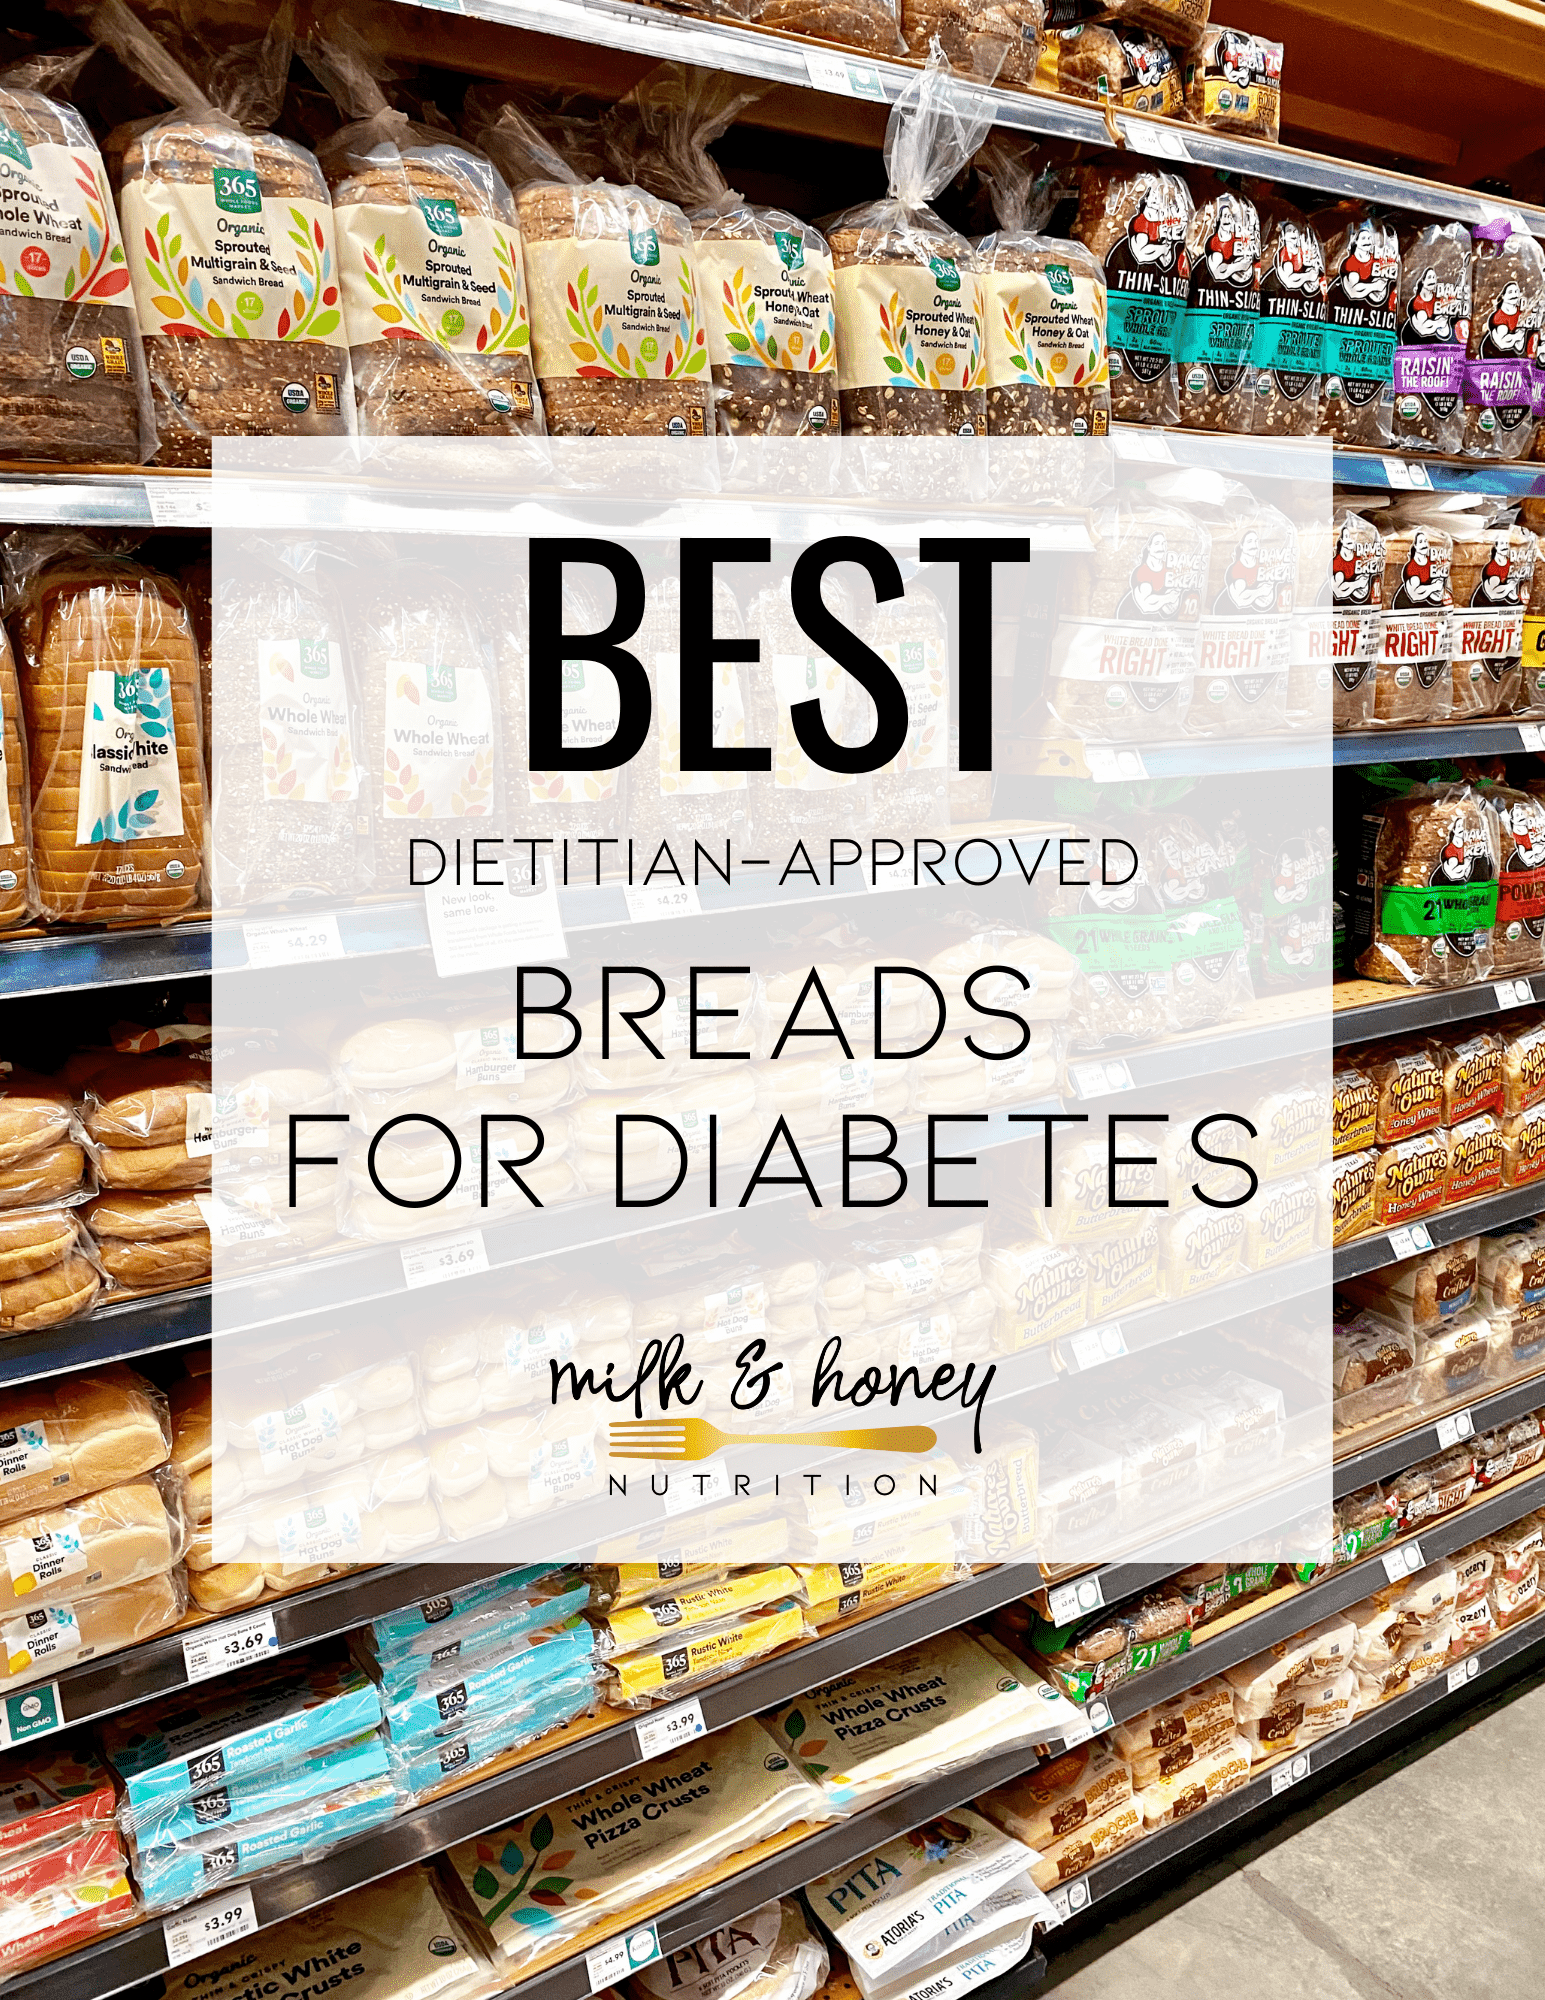 Making And Eating The Best White Bread & Why I Love Carbs